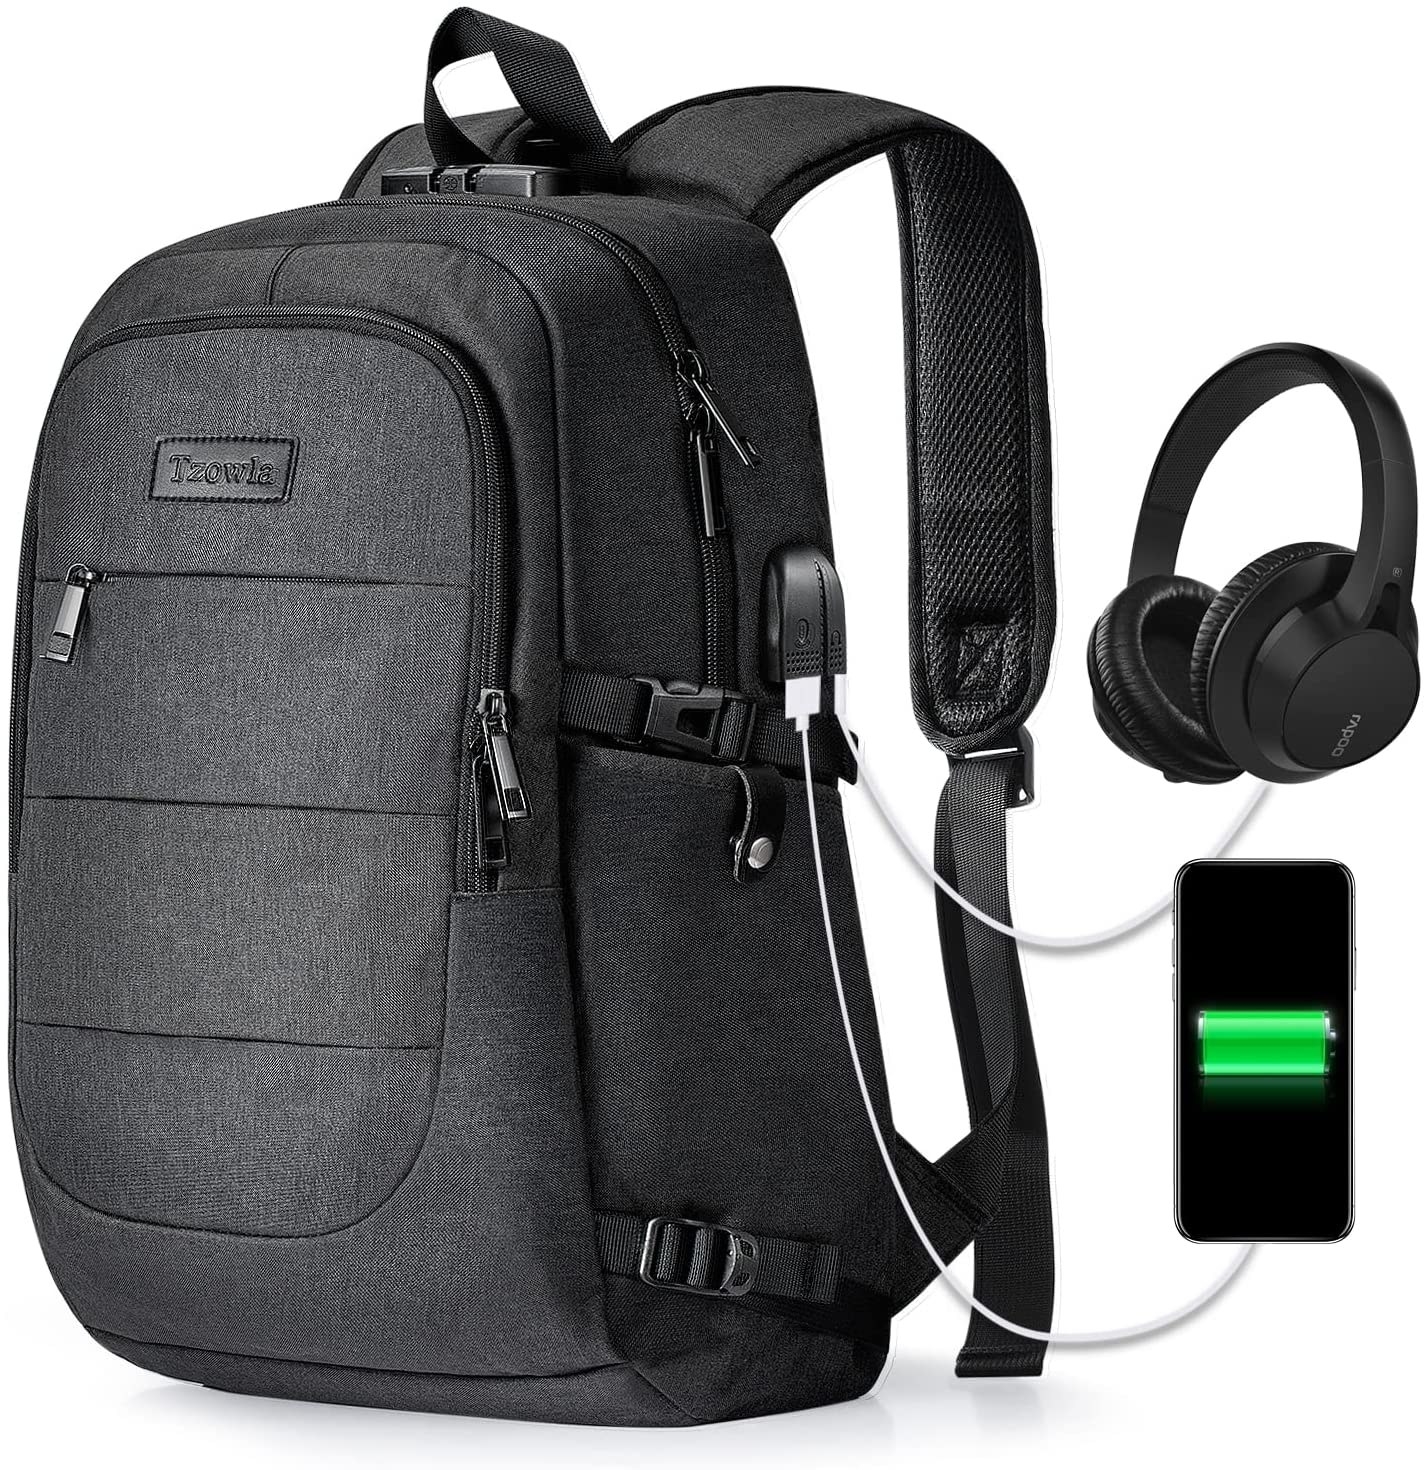 an anti-theft backpack with several devices plugged in